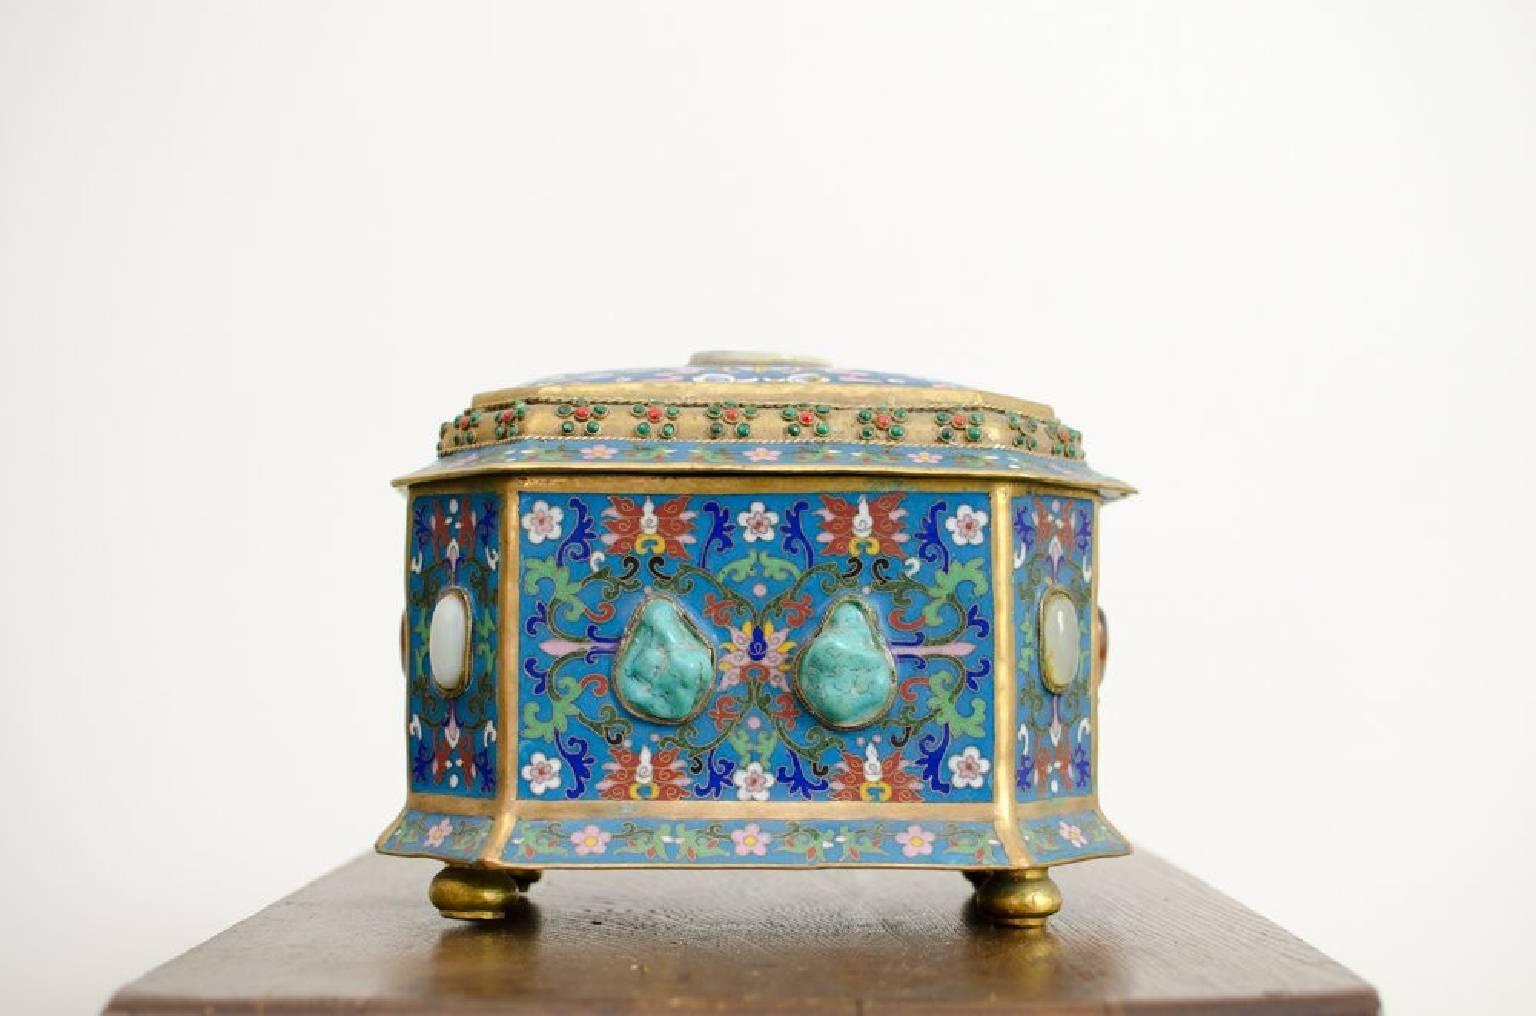 Stone Chinese Hardstone Inlaid Cloisonne Enameled Gilt Metal Casket For Sale